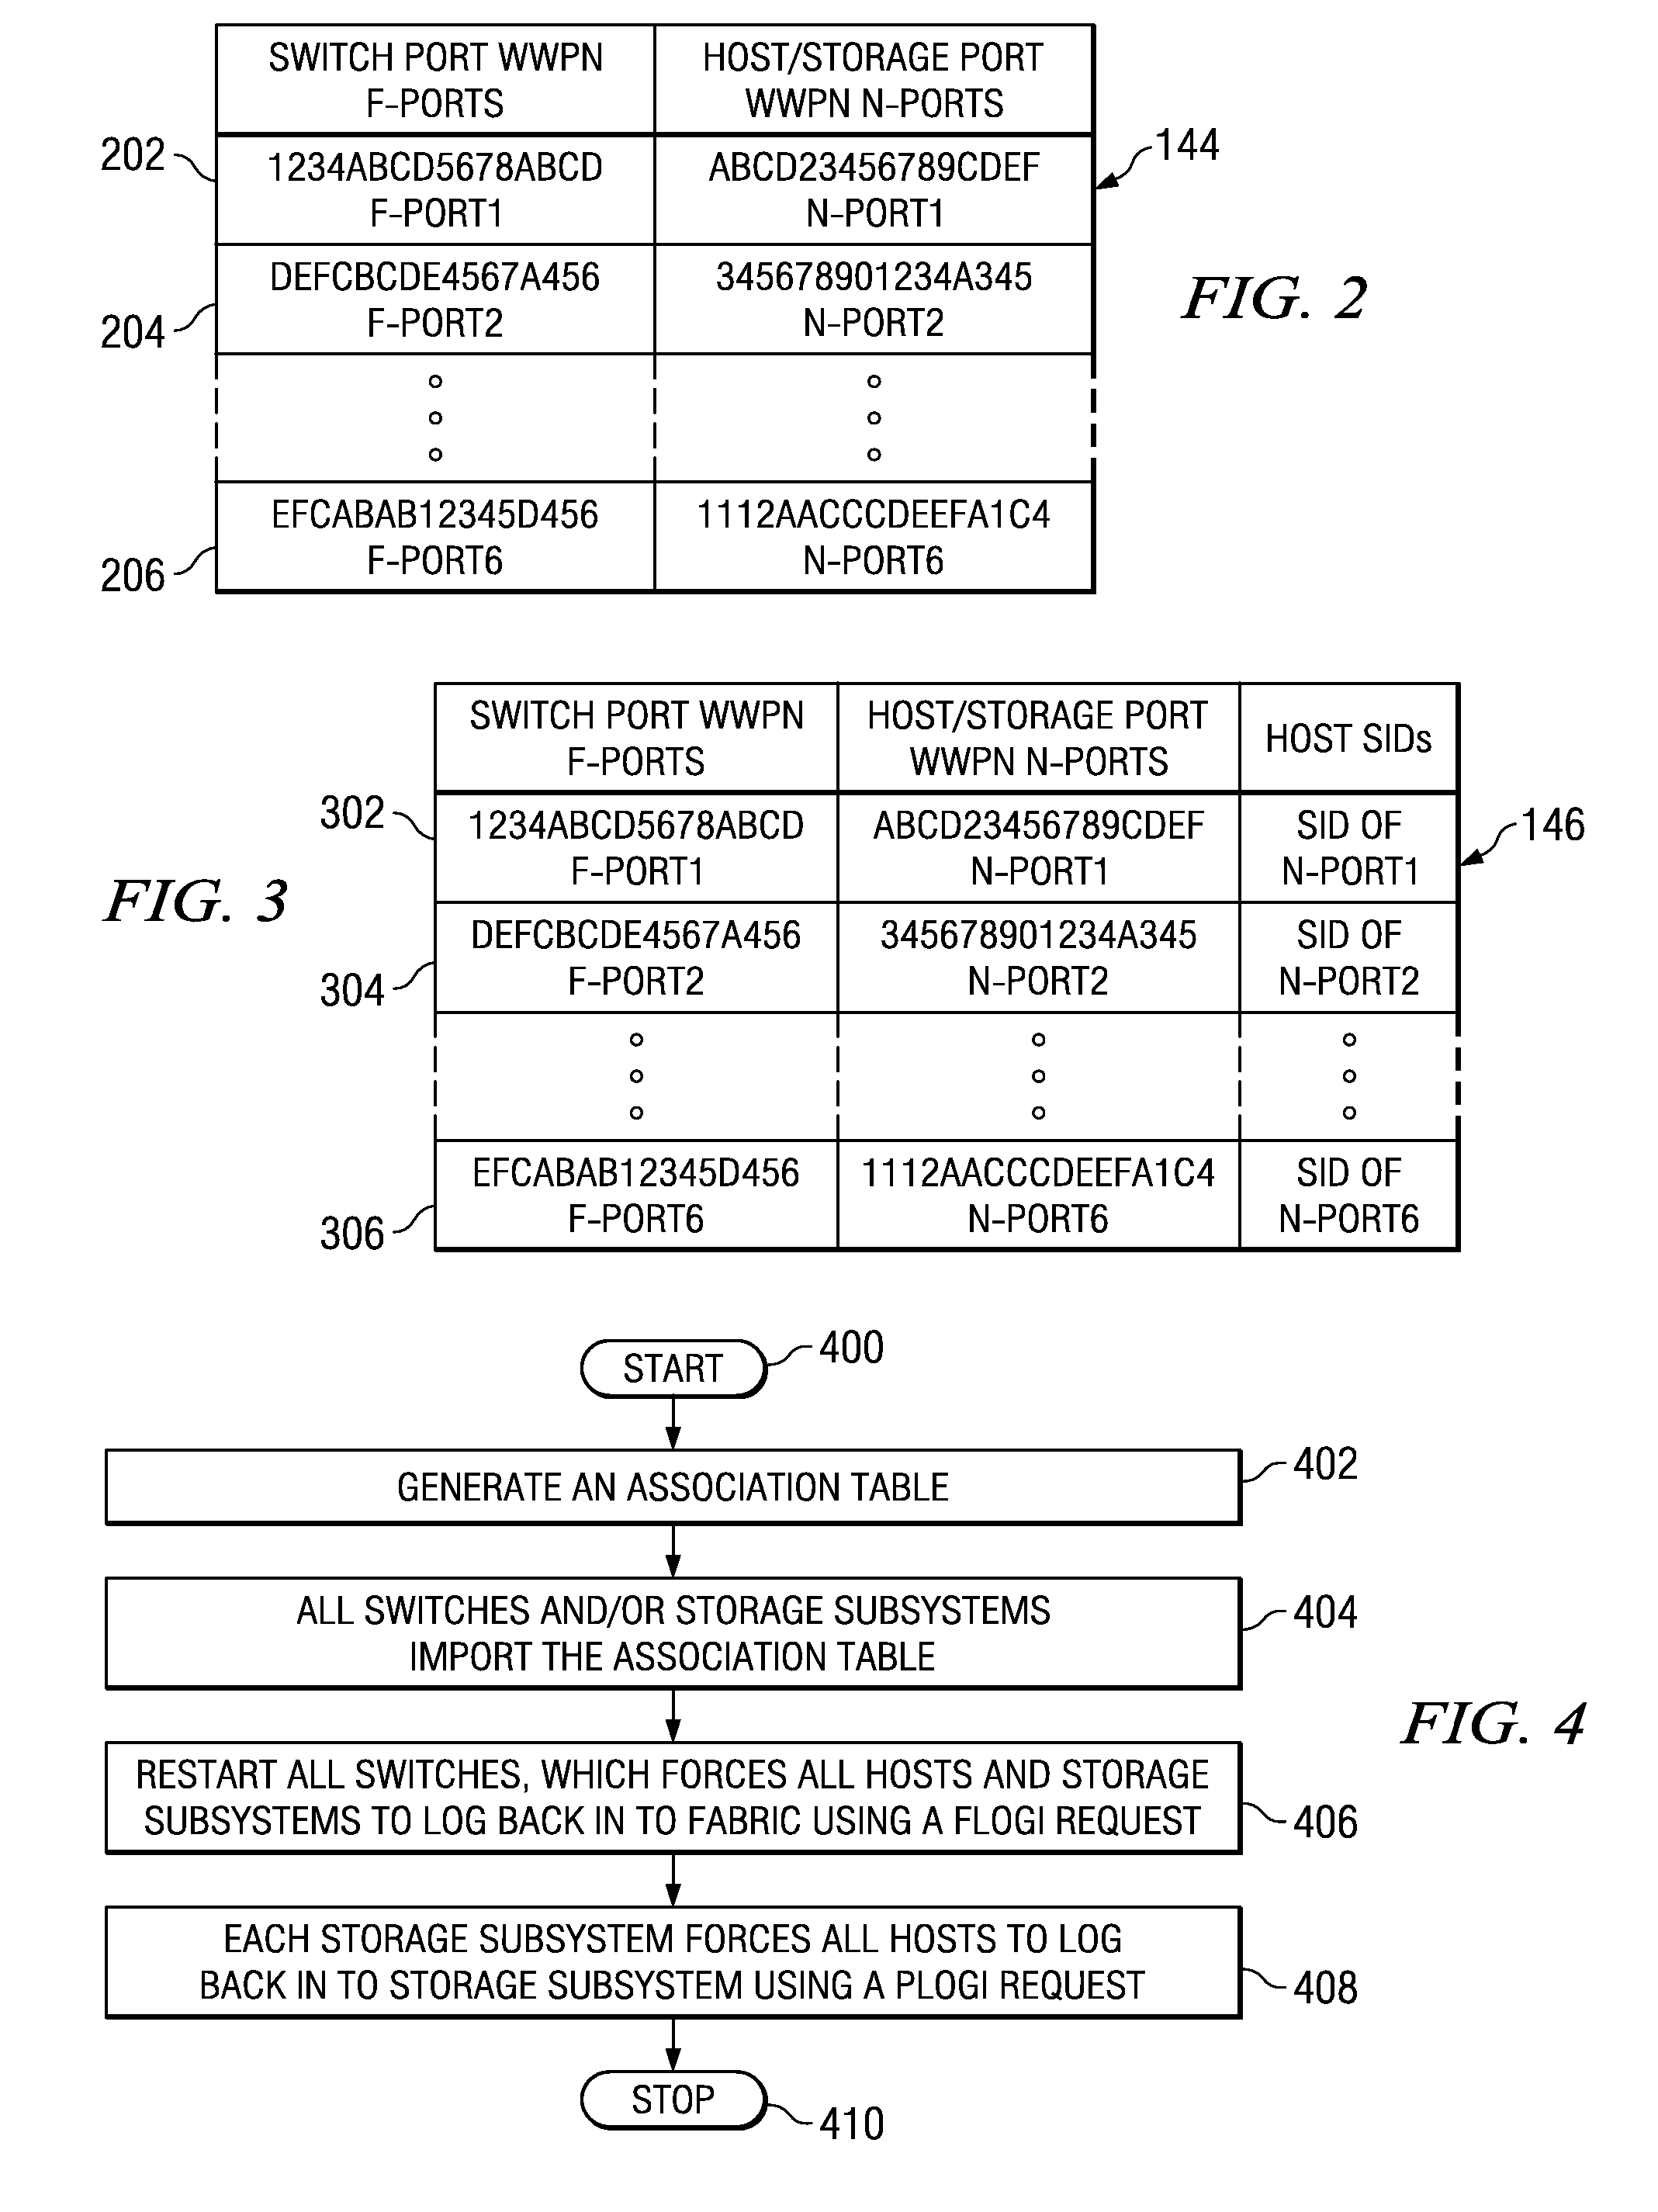 Computer-implemented method, apparatus, and computer program product for securing node port access in a switched-fabric storage area network